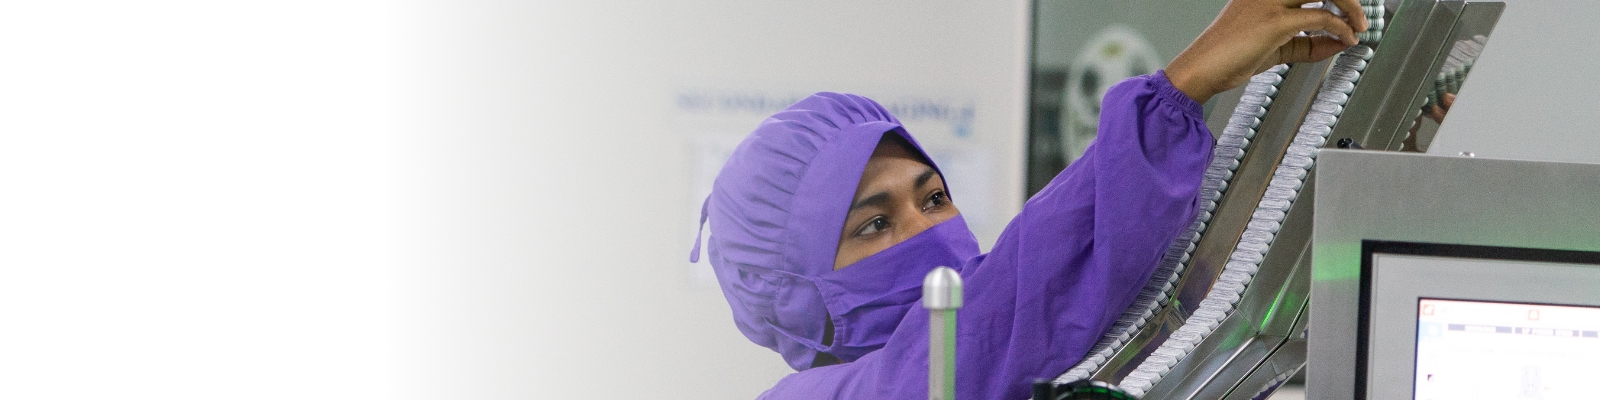 Worker in a purple gown, mask, and hairnet handling medicines in a manufacturing facility in Bangladesh